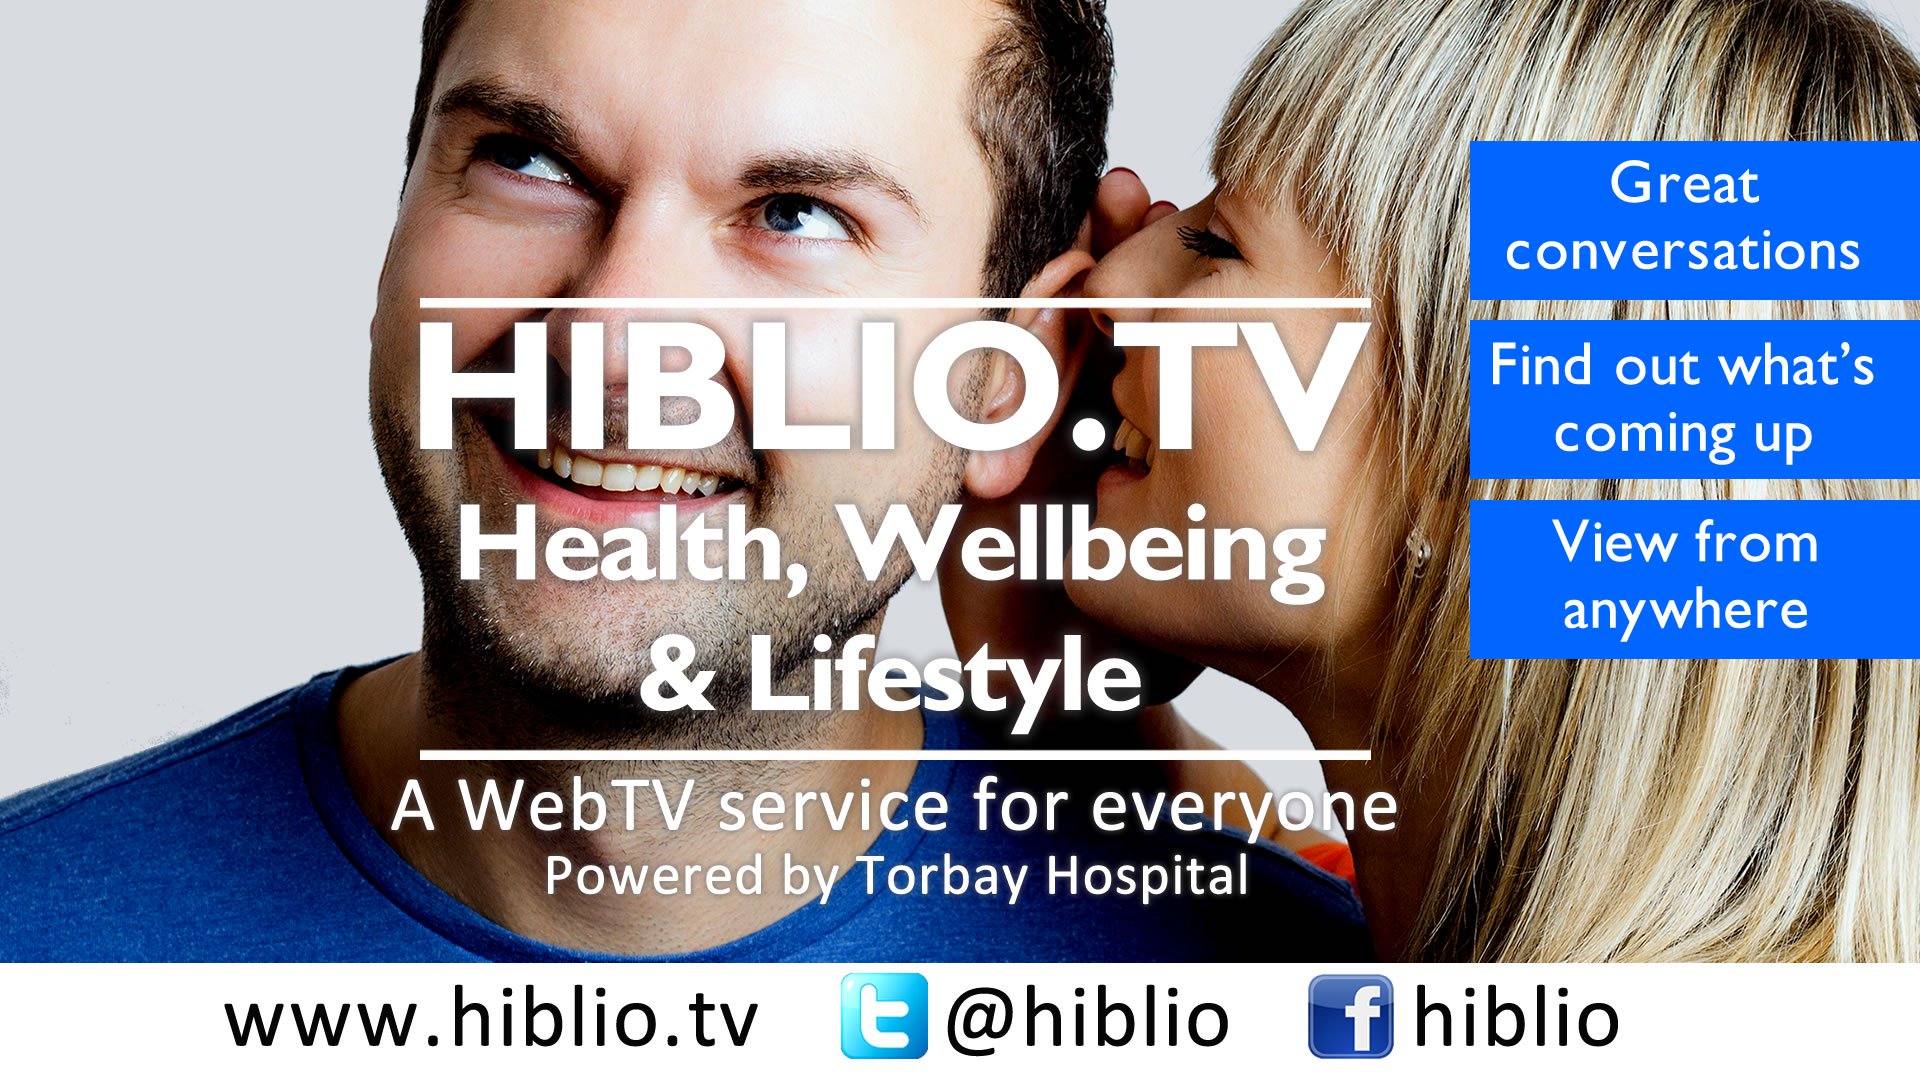 Hiblio.TV - Health, wellbeing, lifestyle. One channel, great conversations. featured image